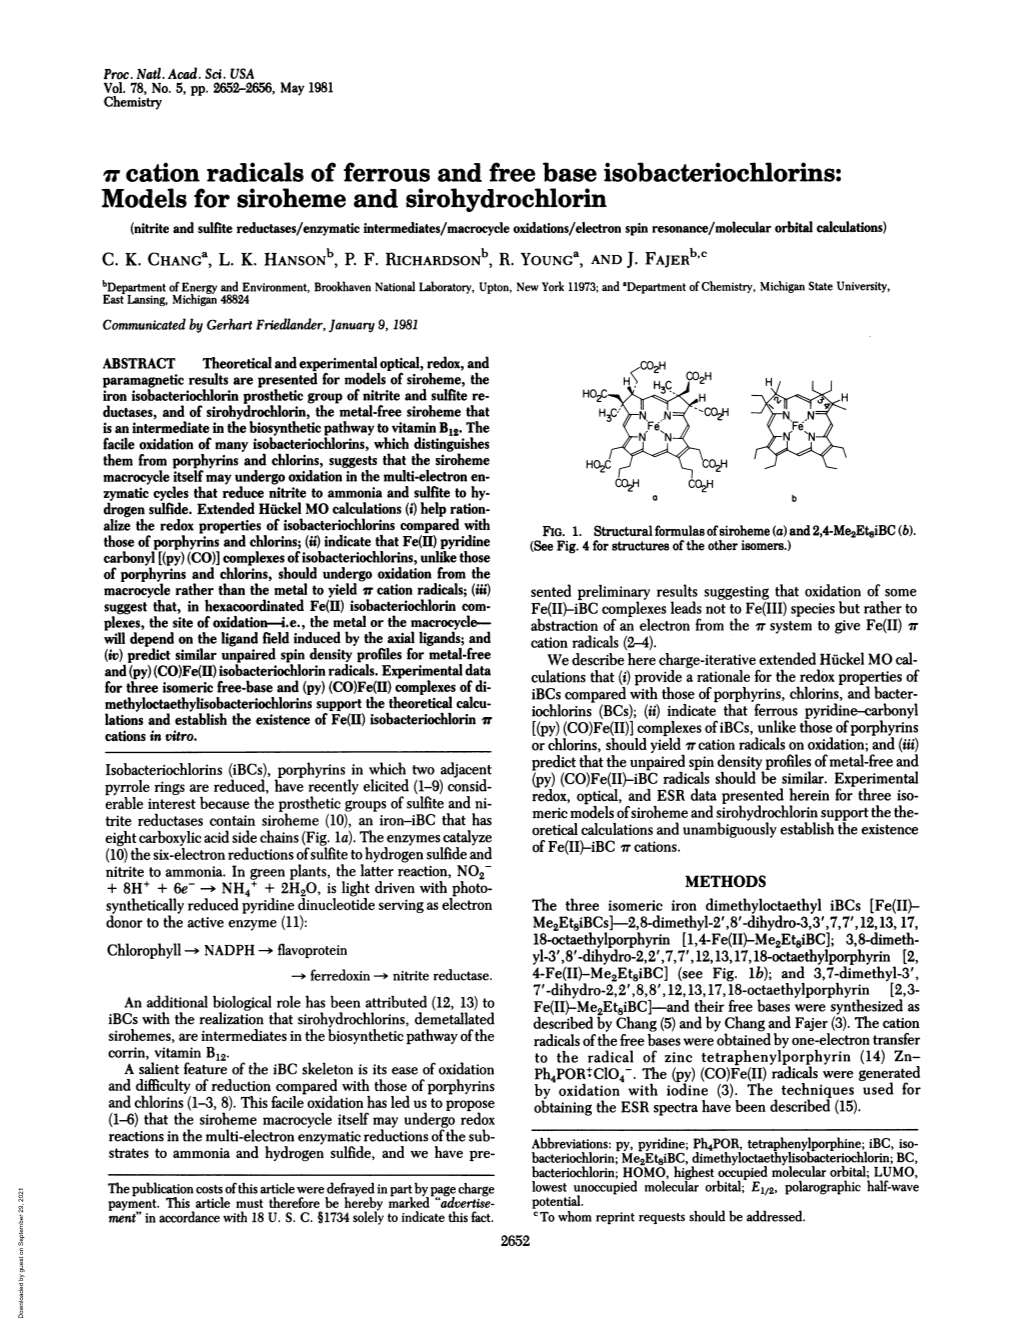 Vi Cation Radicals of Ferrous and Free Base Isobacteriochlorins: Models